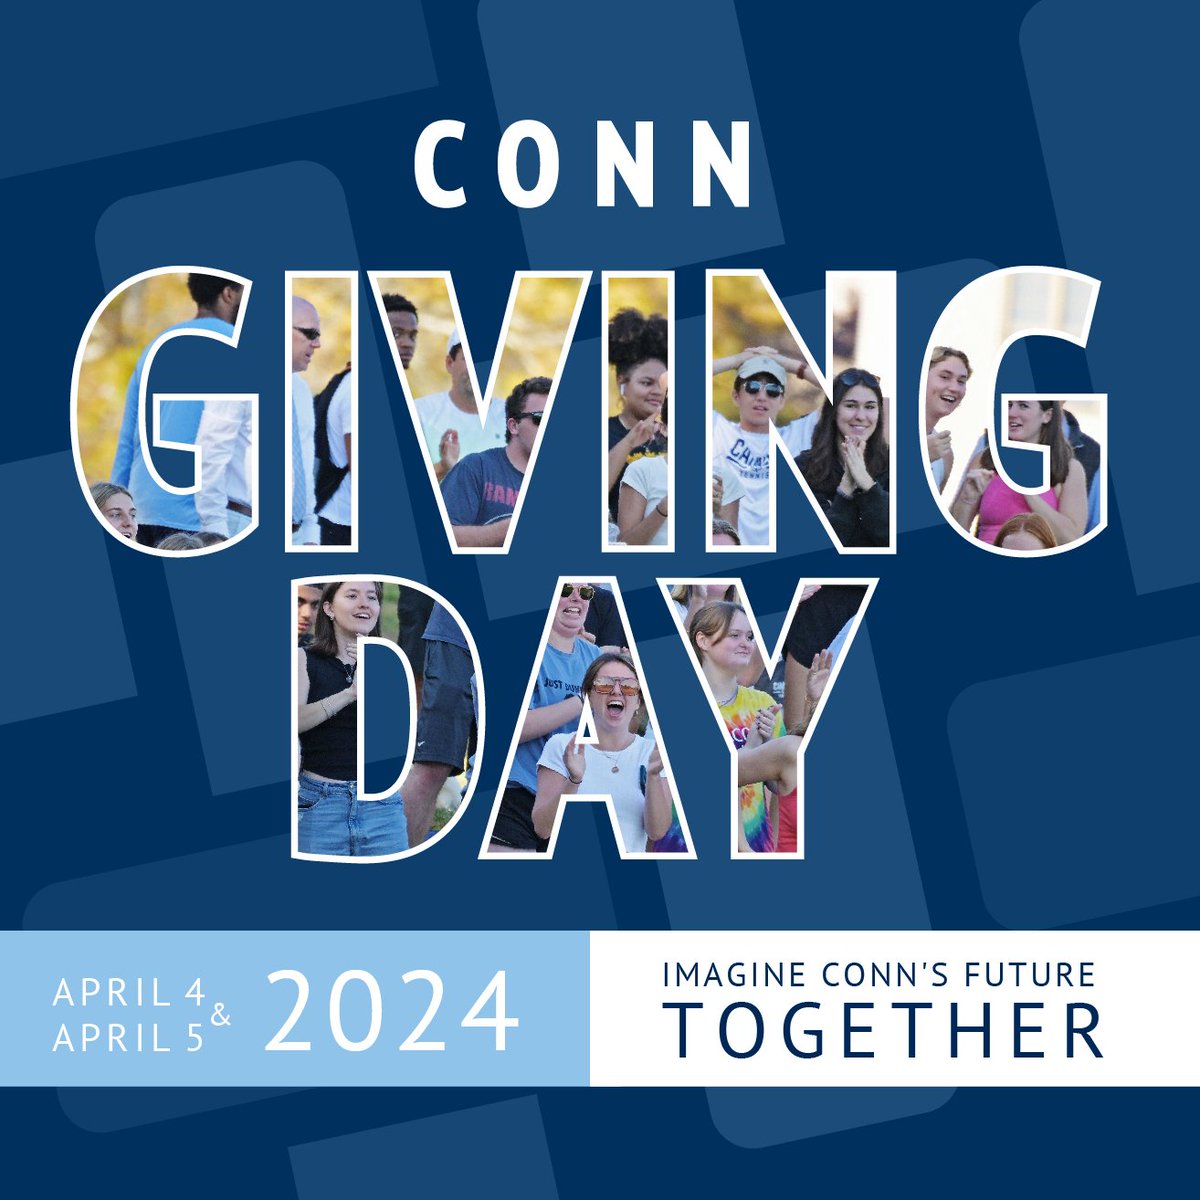 Conn Giving Day is here! 🎉 Over the next 1,911 minutes, the #ConnCollege community will come together to give back. 🔗 Imagine Conn’s future and learn more: givingday.conncoll.edu